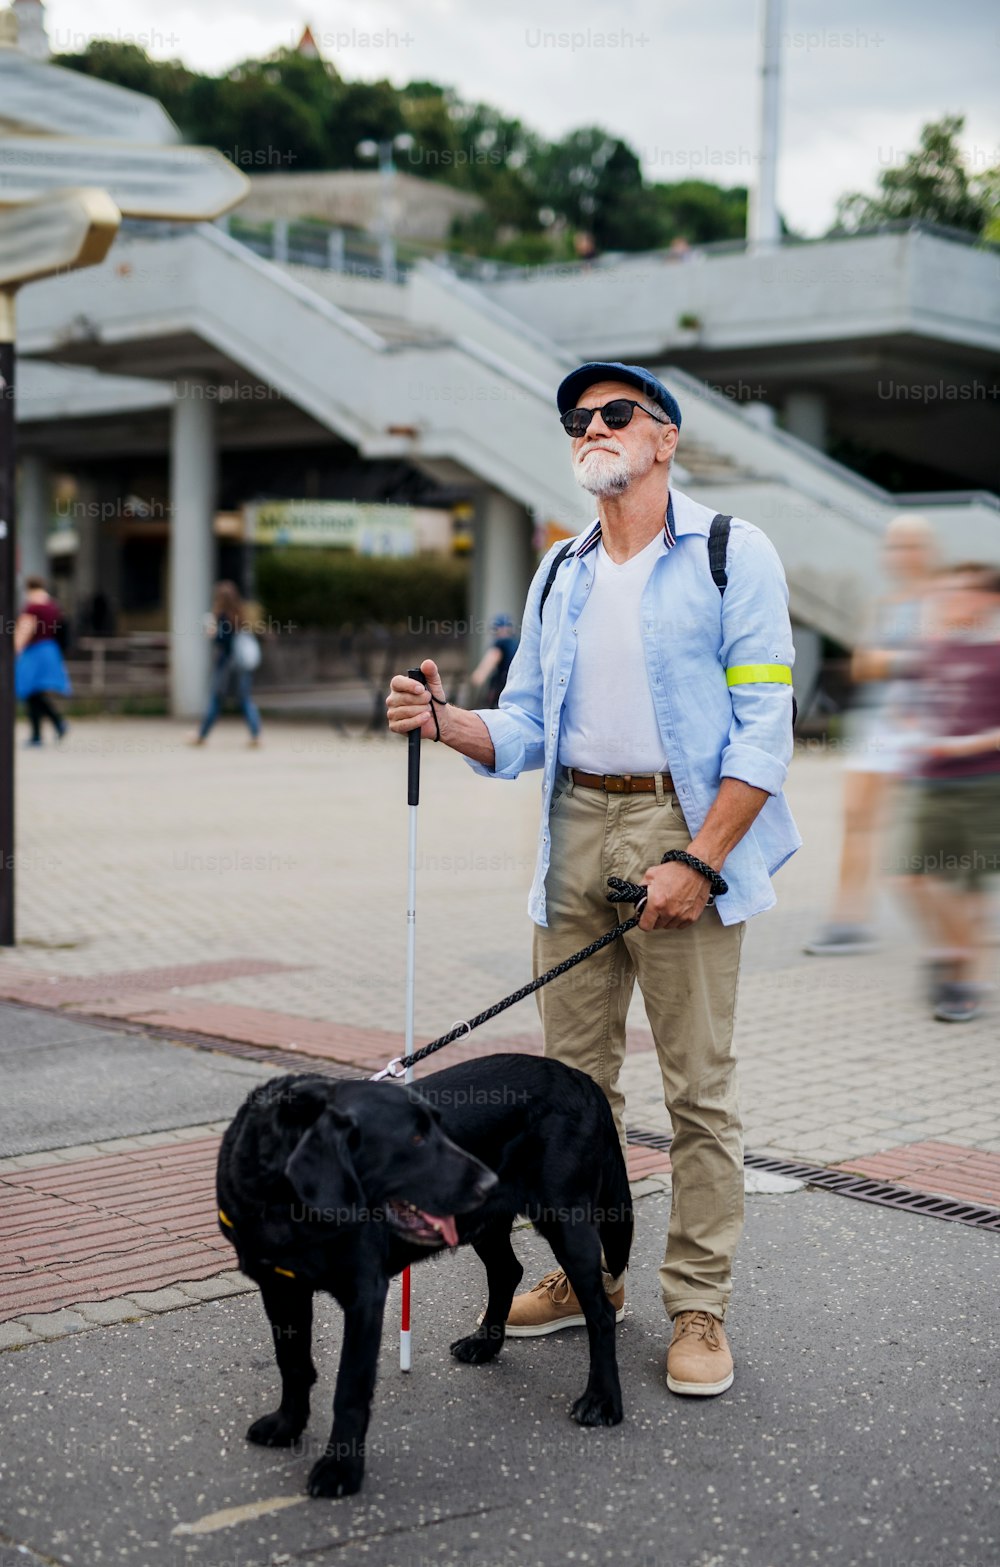 A senior blind man with guide dog standing outdoors in city.